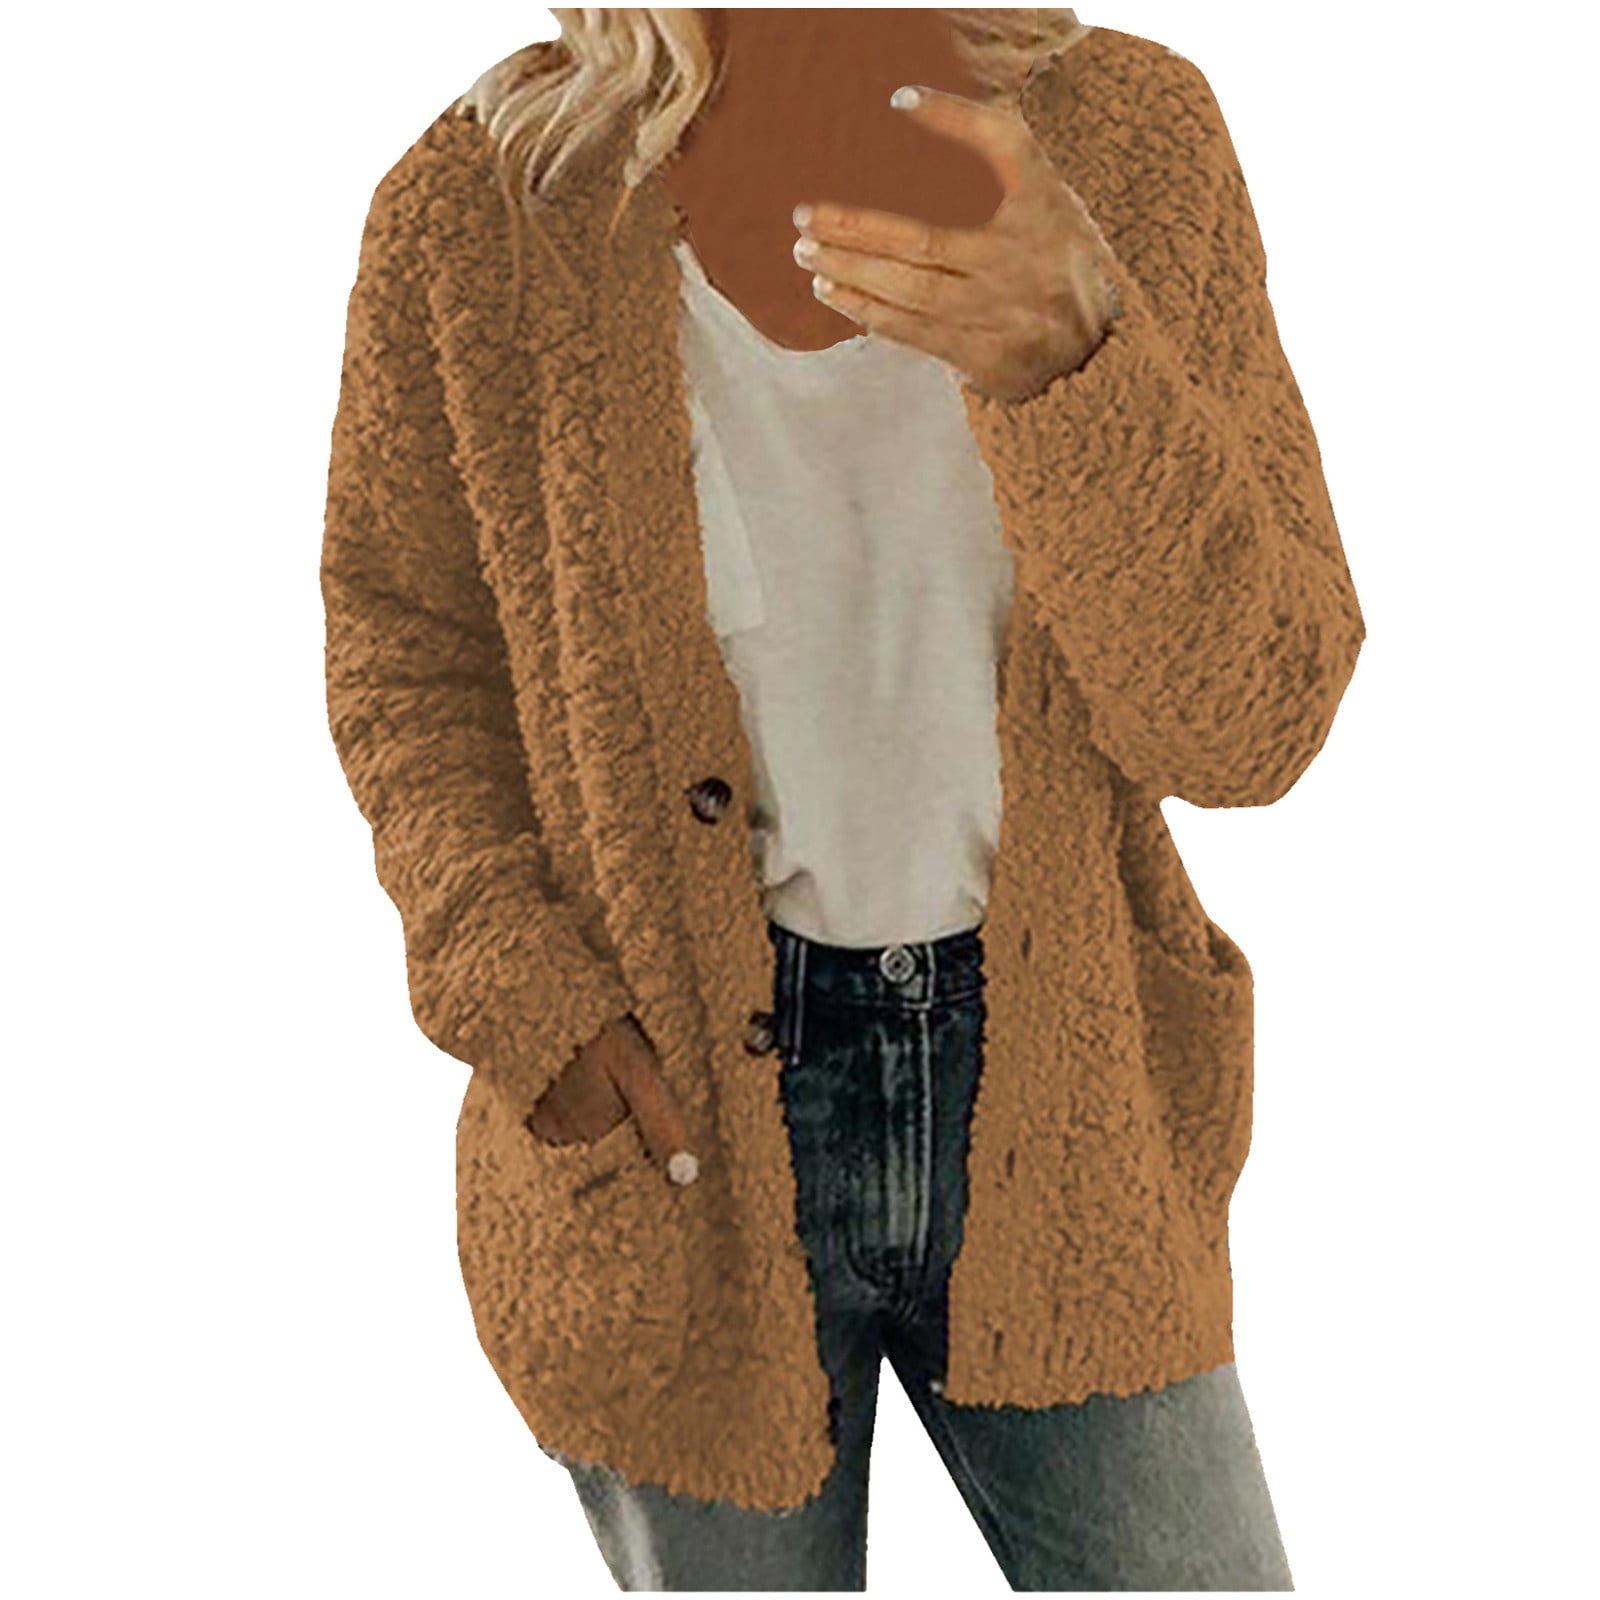 Winter Clearance Cardigan Sweaters for Women Long Sleeve Loose Coat ...